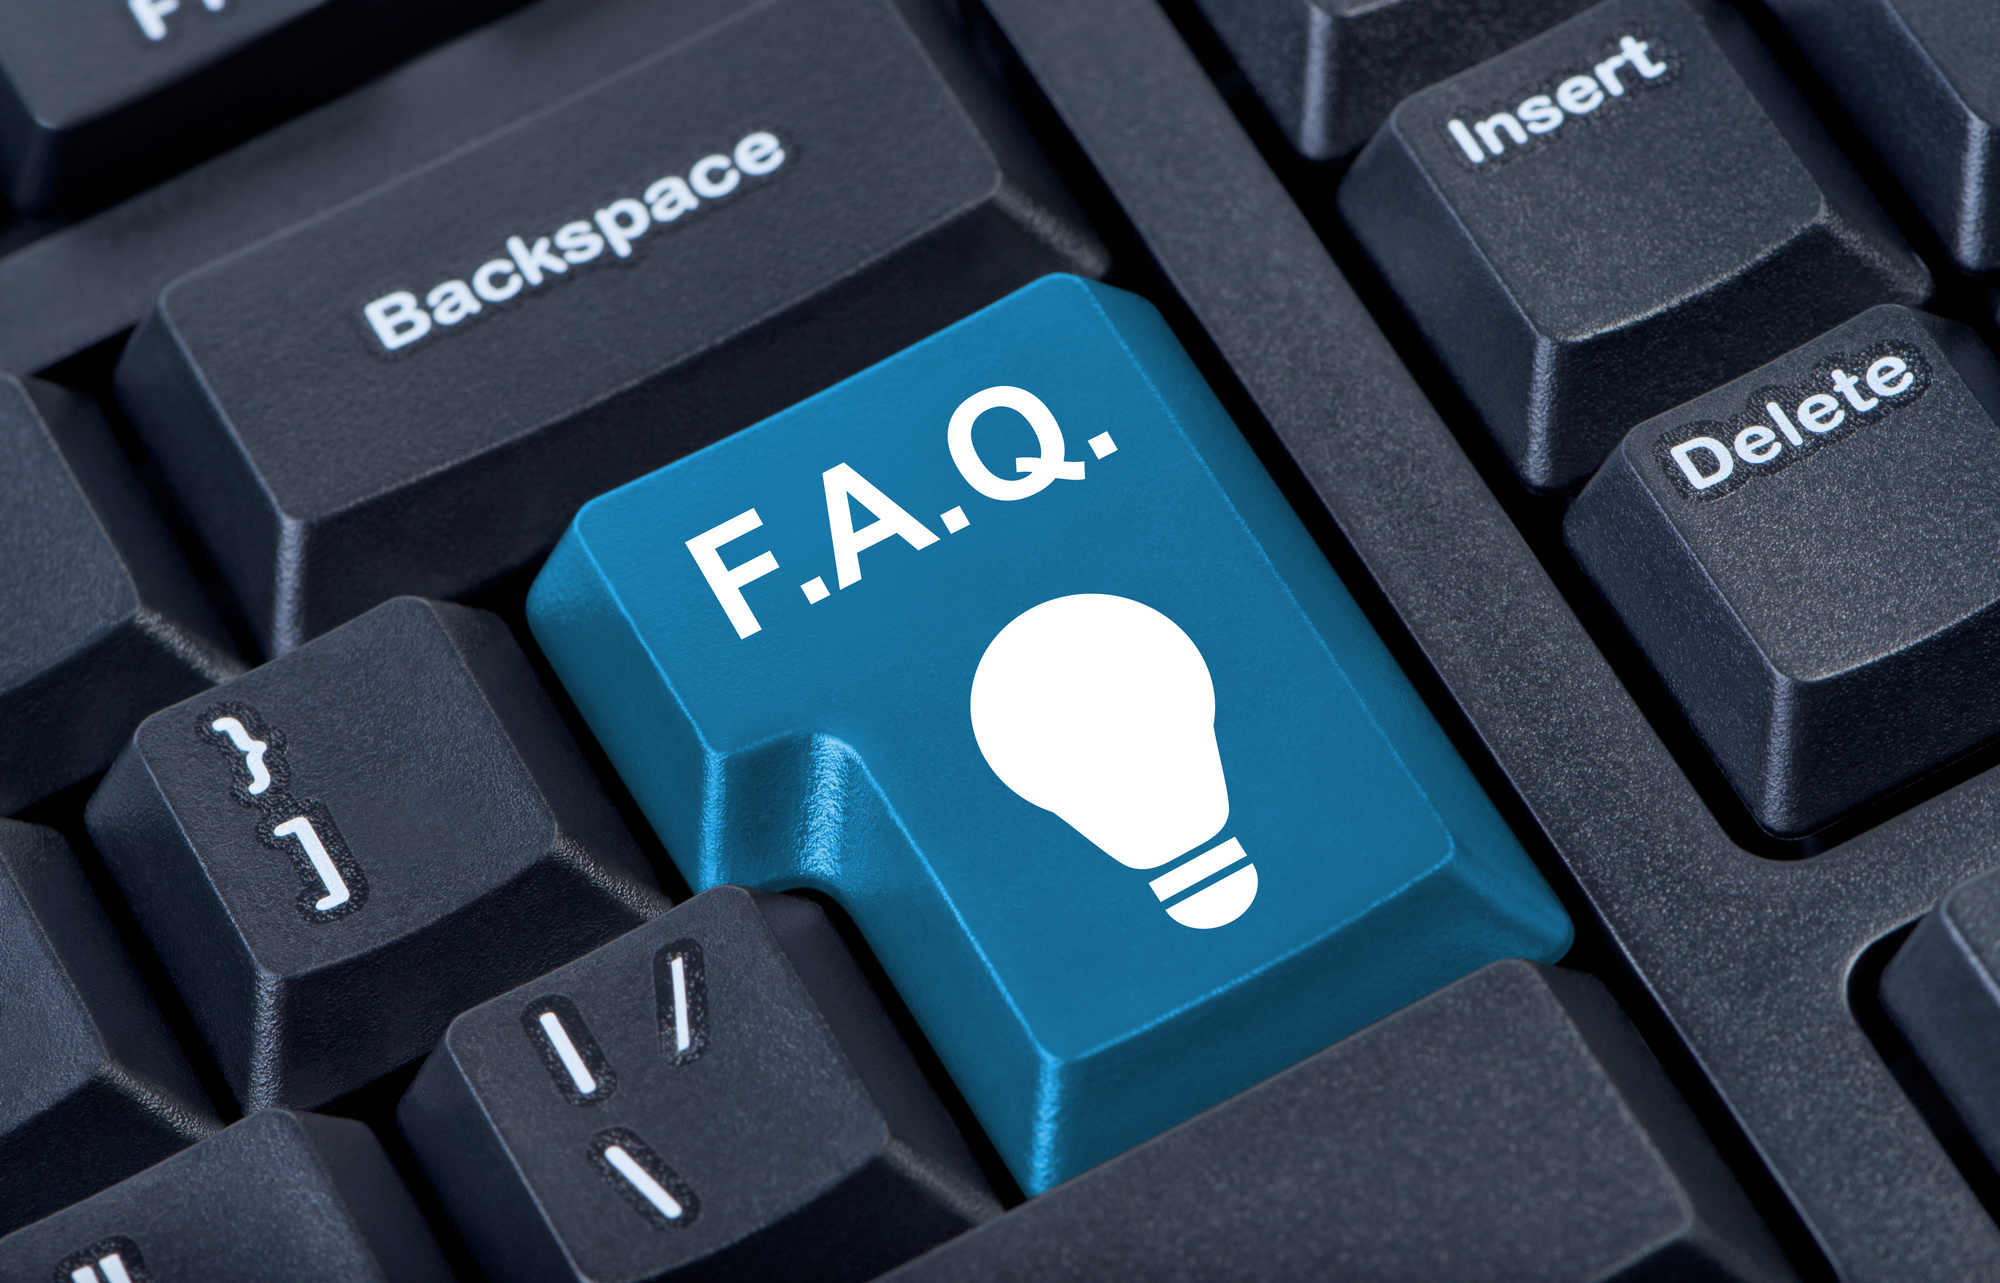 every site needs an FAQ page